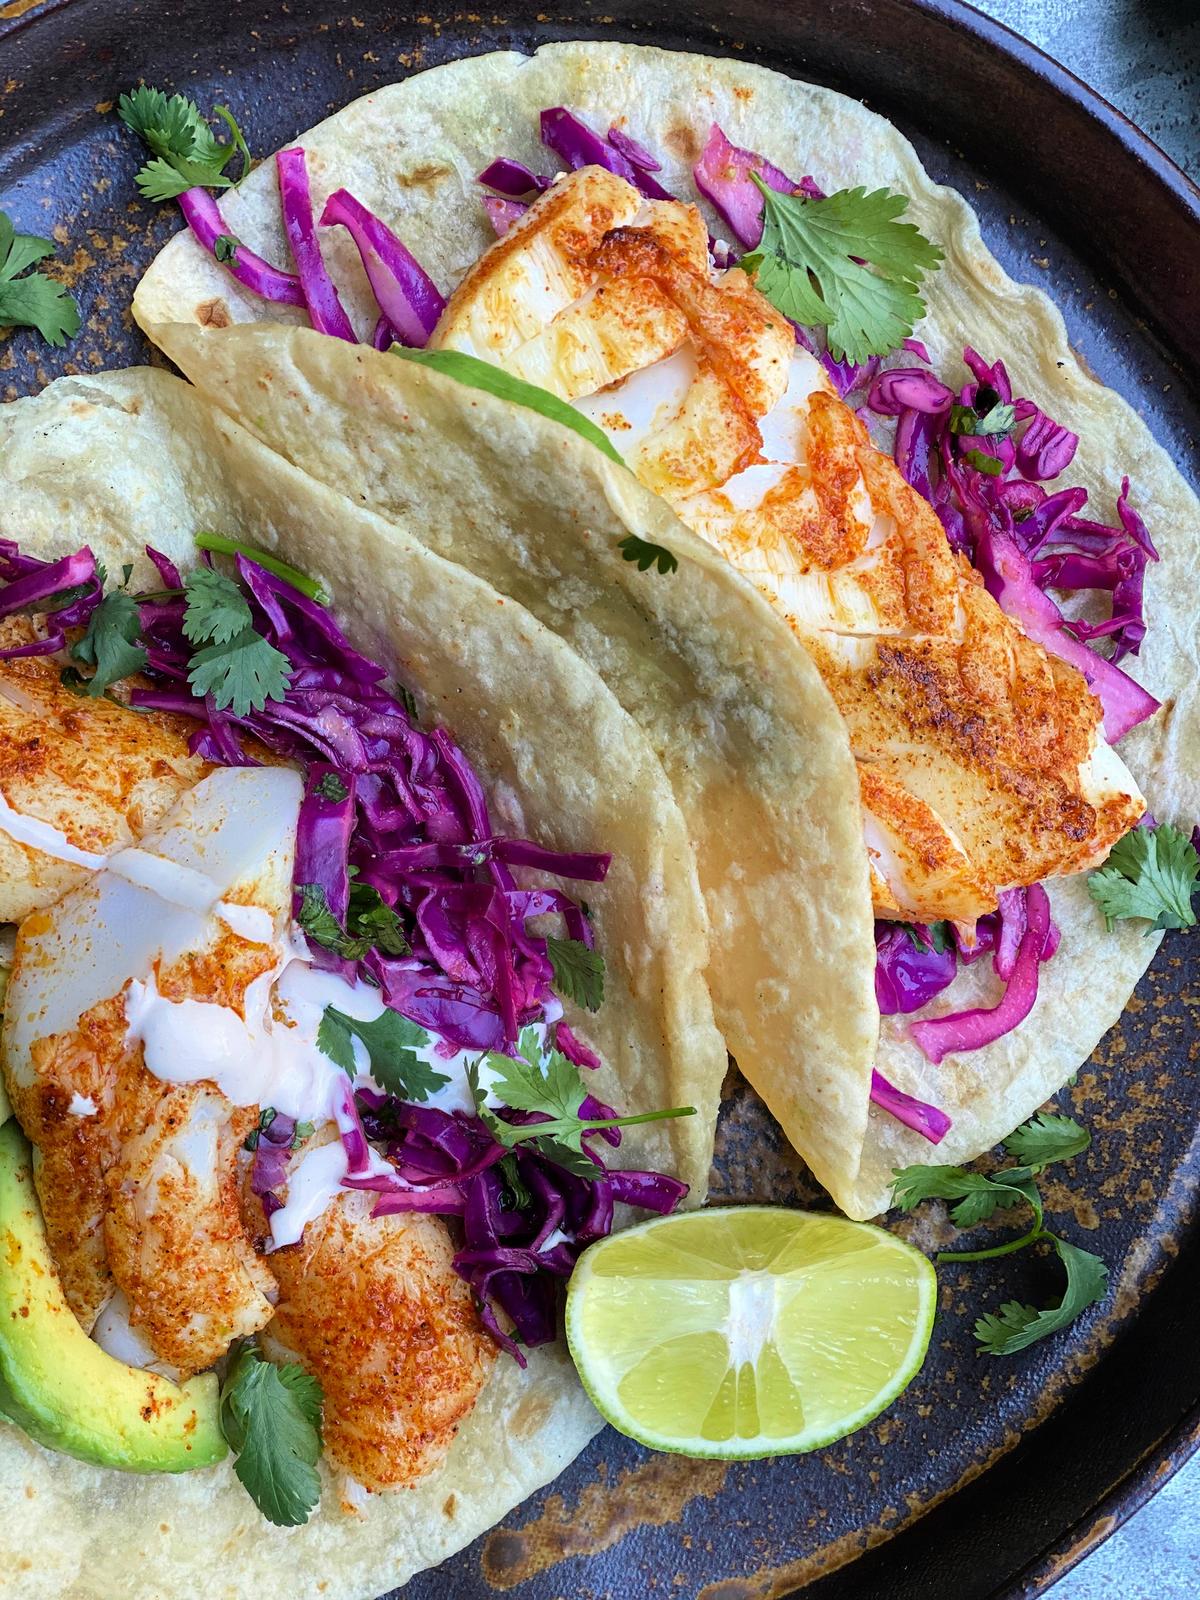 These light and bright fish tacos are finished with a vibrant salsa verde, either homemade or store-bought. (Lynda Balslev for Tastefood)